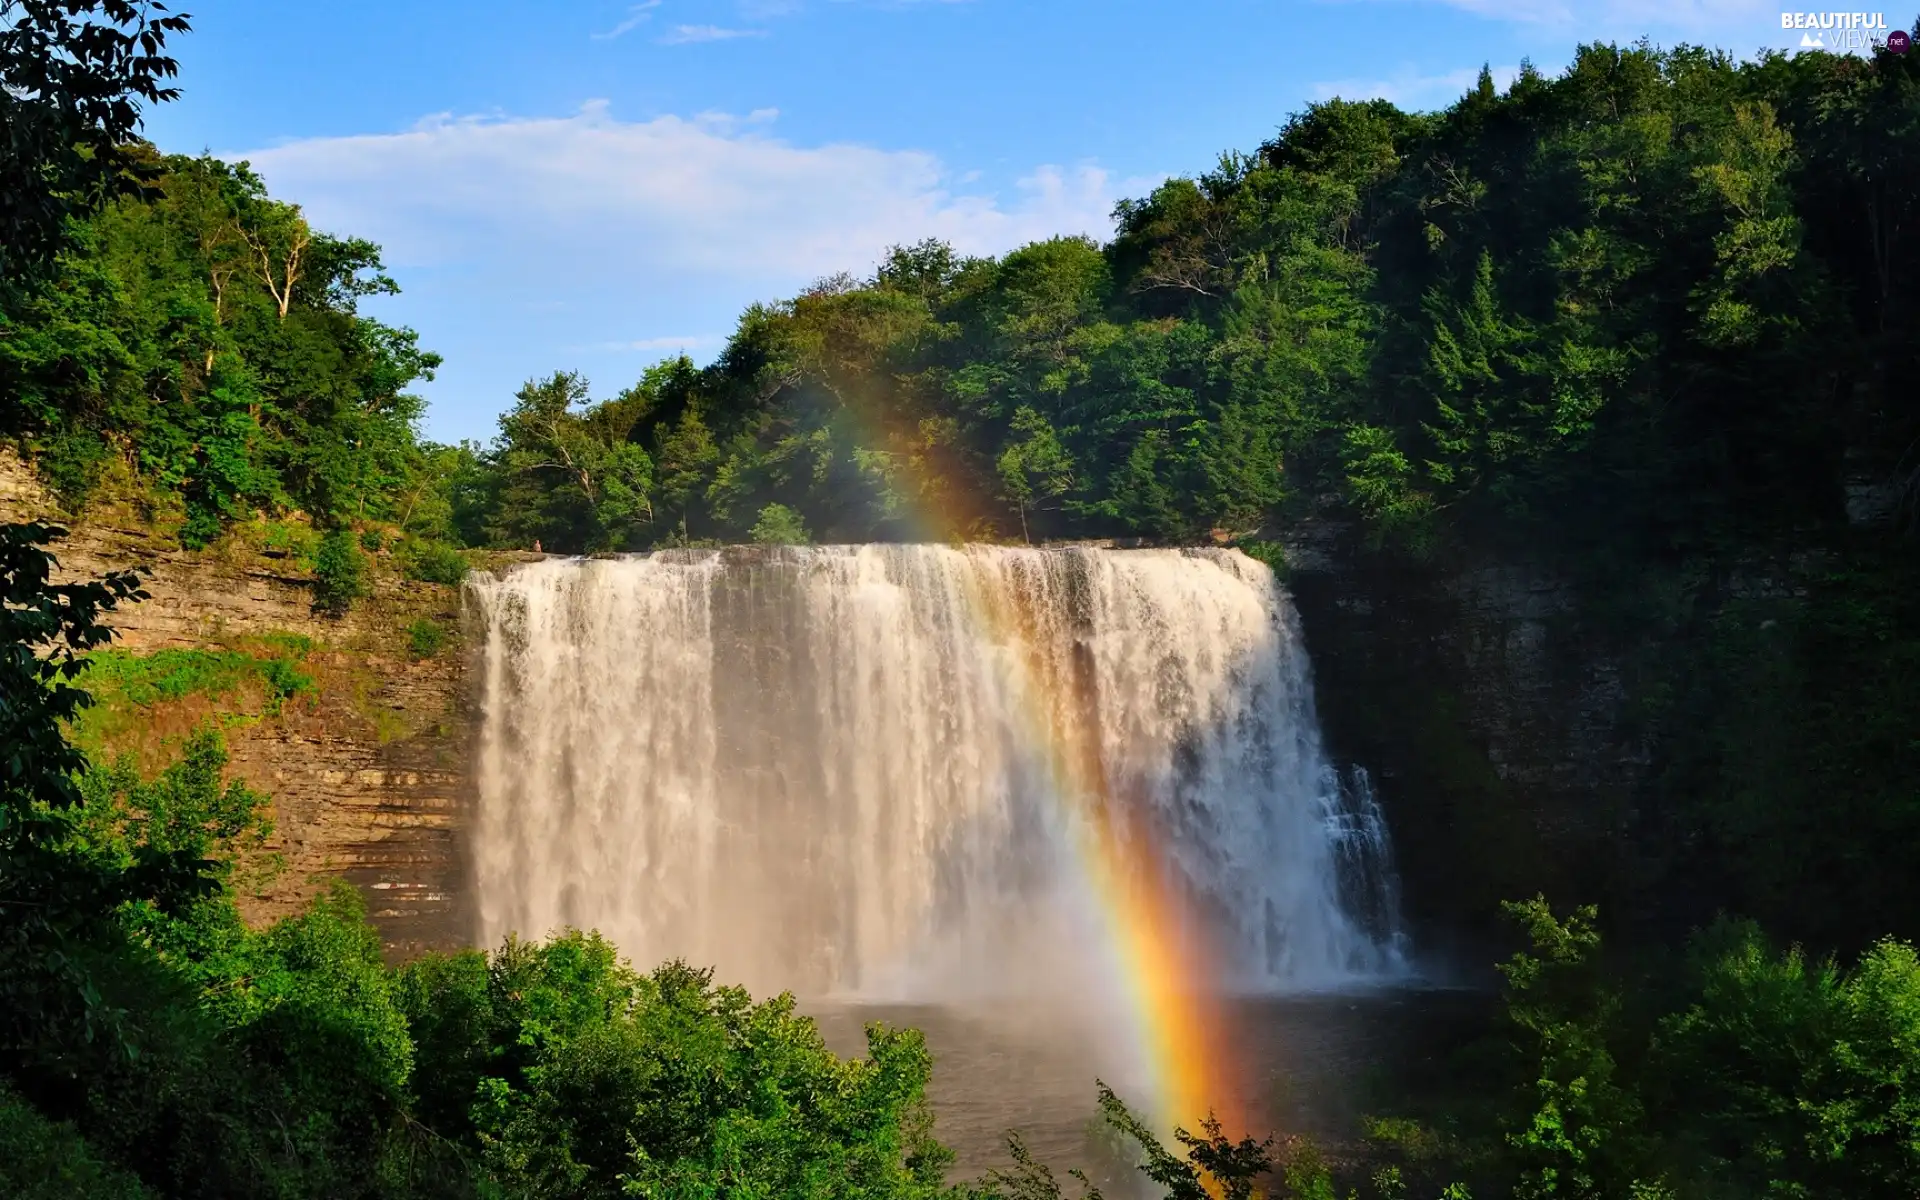 viewes, forest, Great Rainbows, trees, waterfall